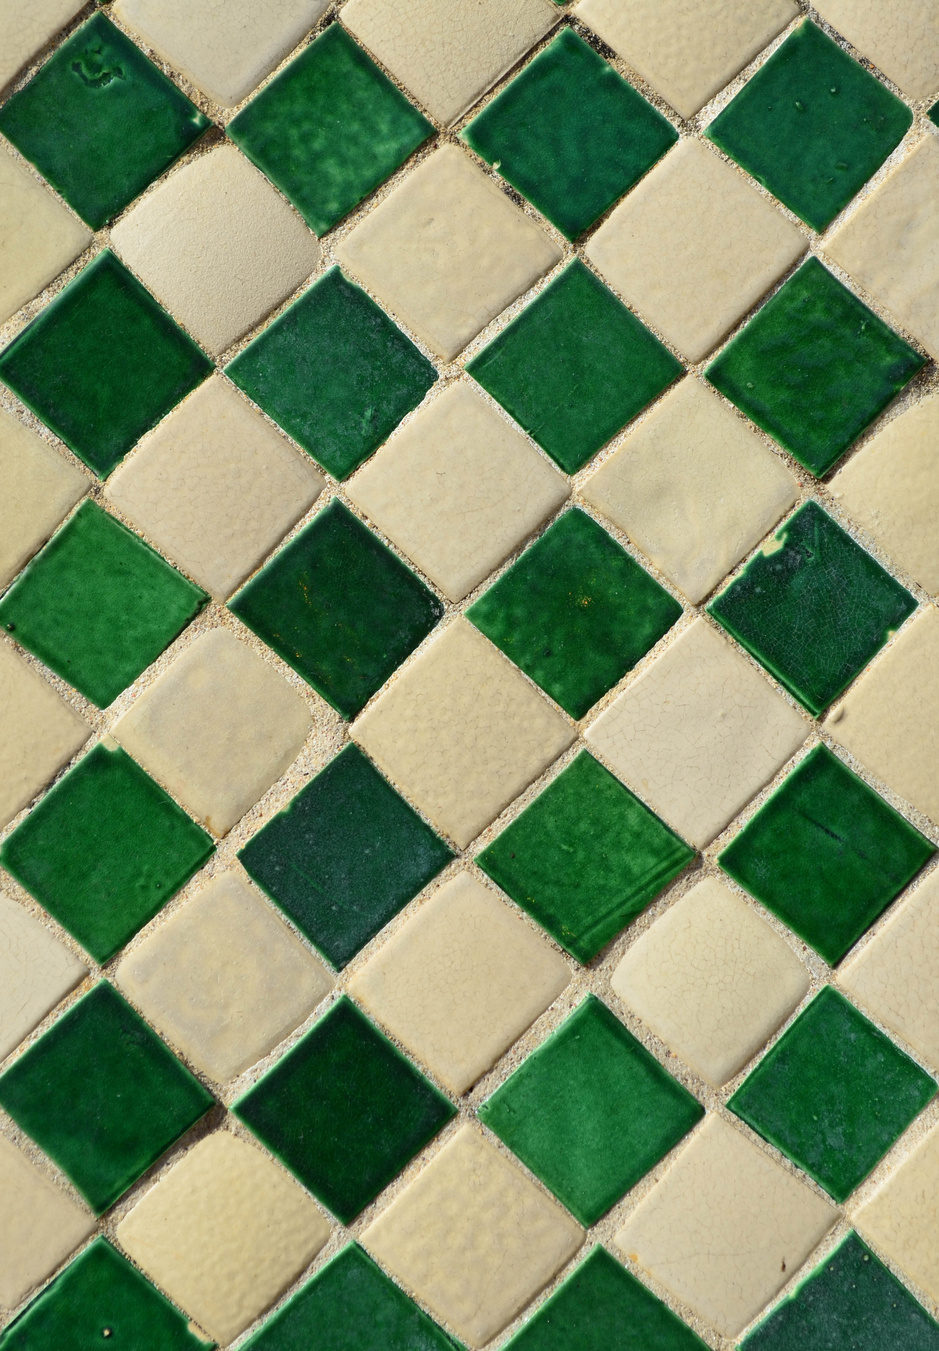 Green and yellow ceramic tile